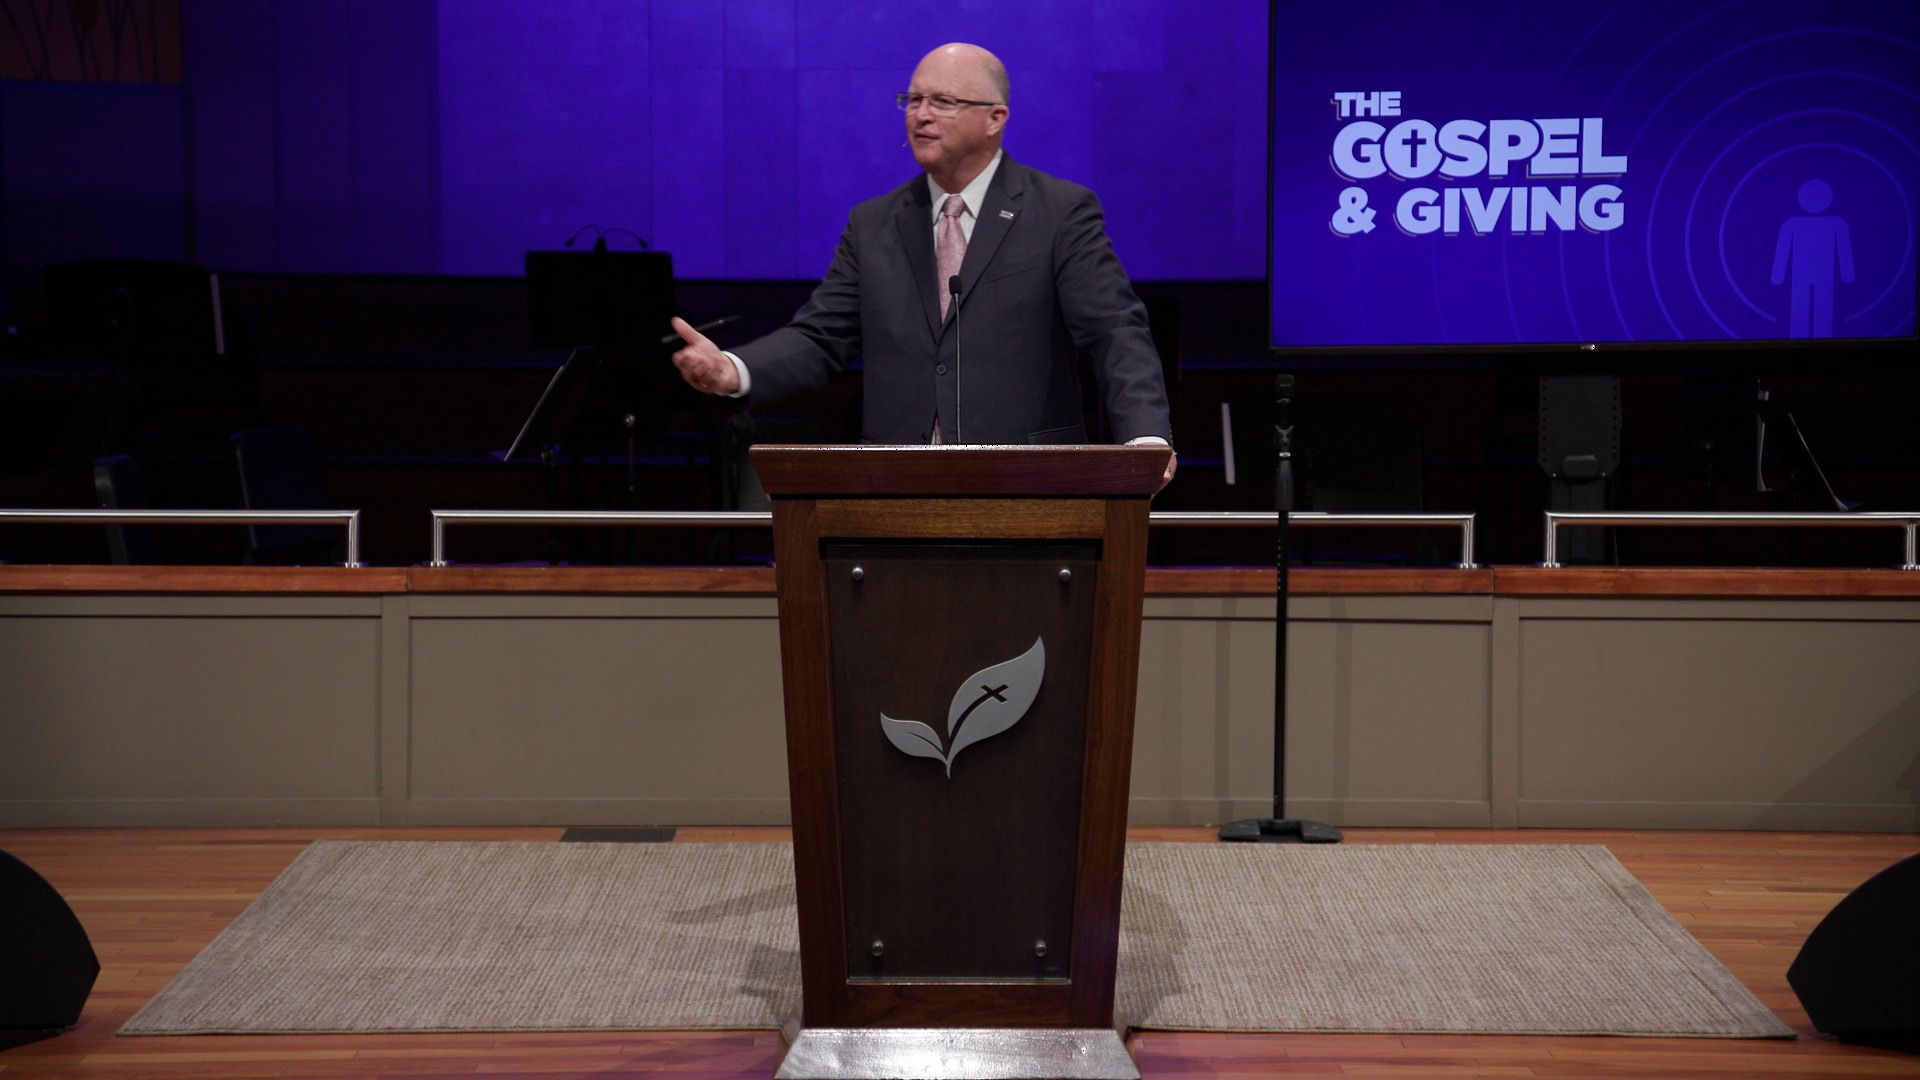 Pastor Paul Chappell: The Gospel and Giving